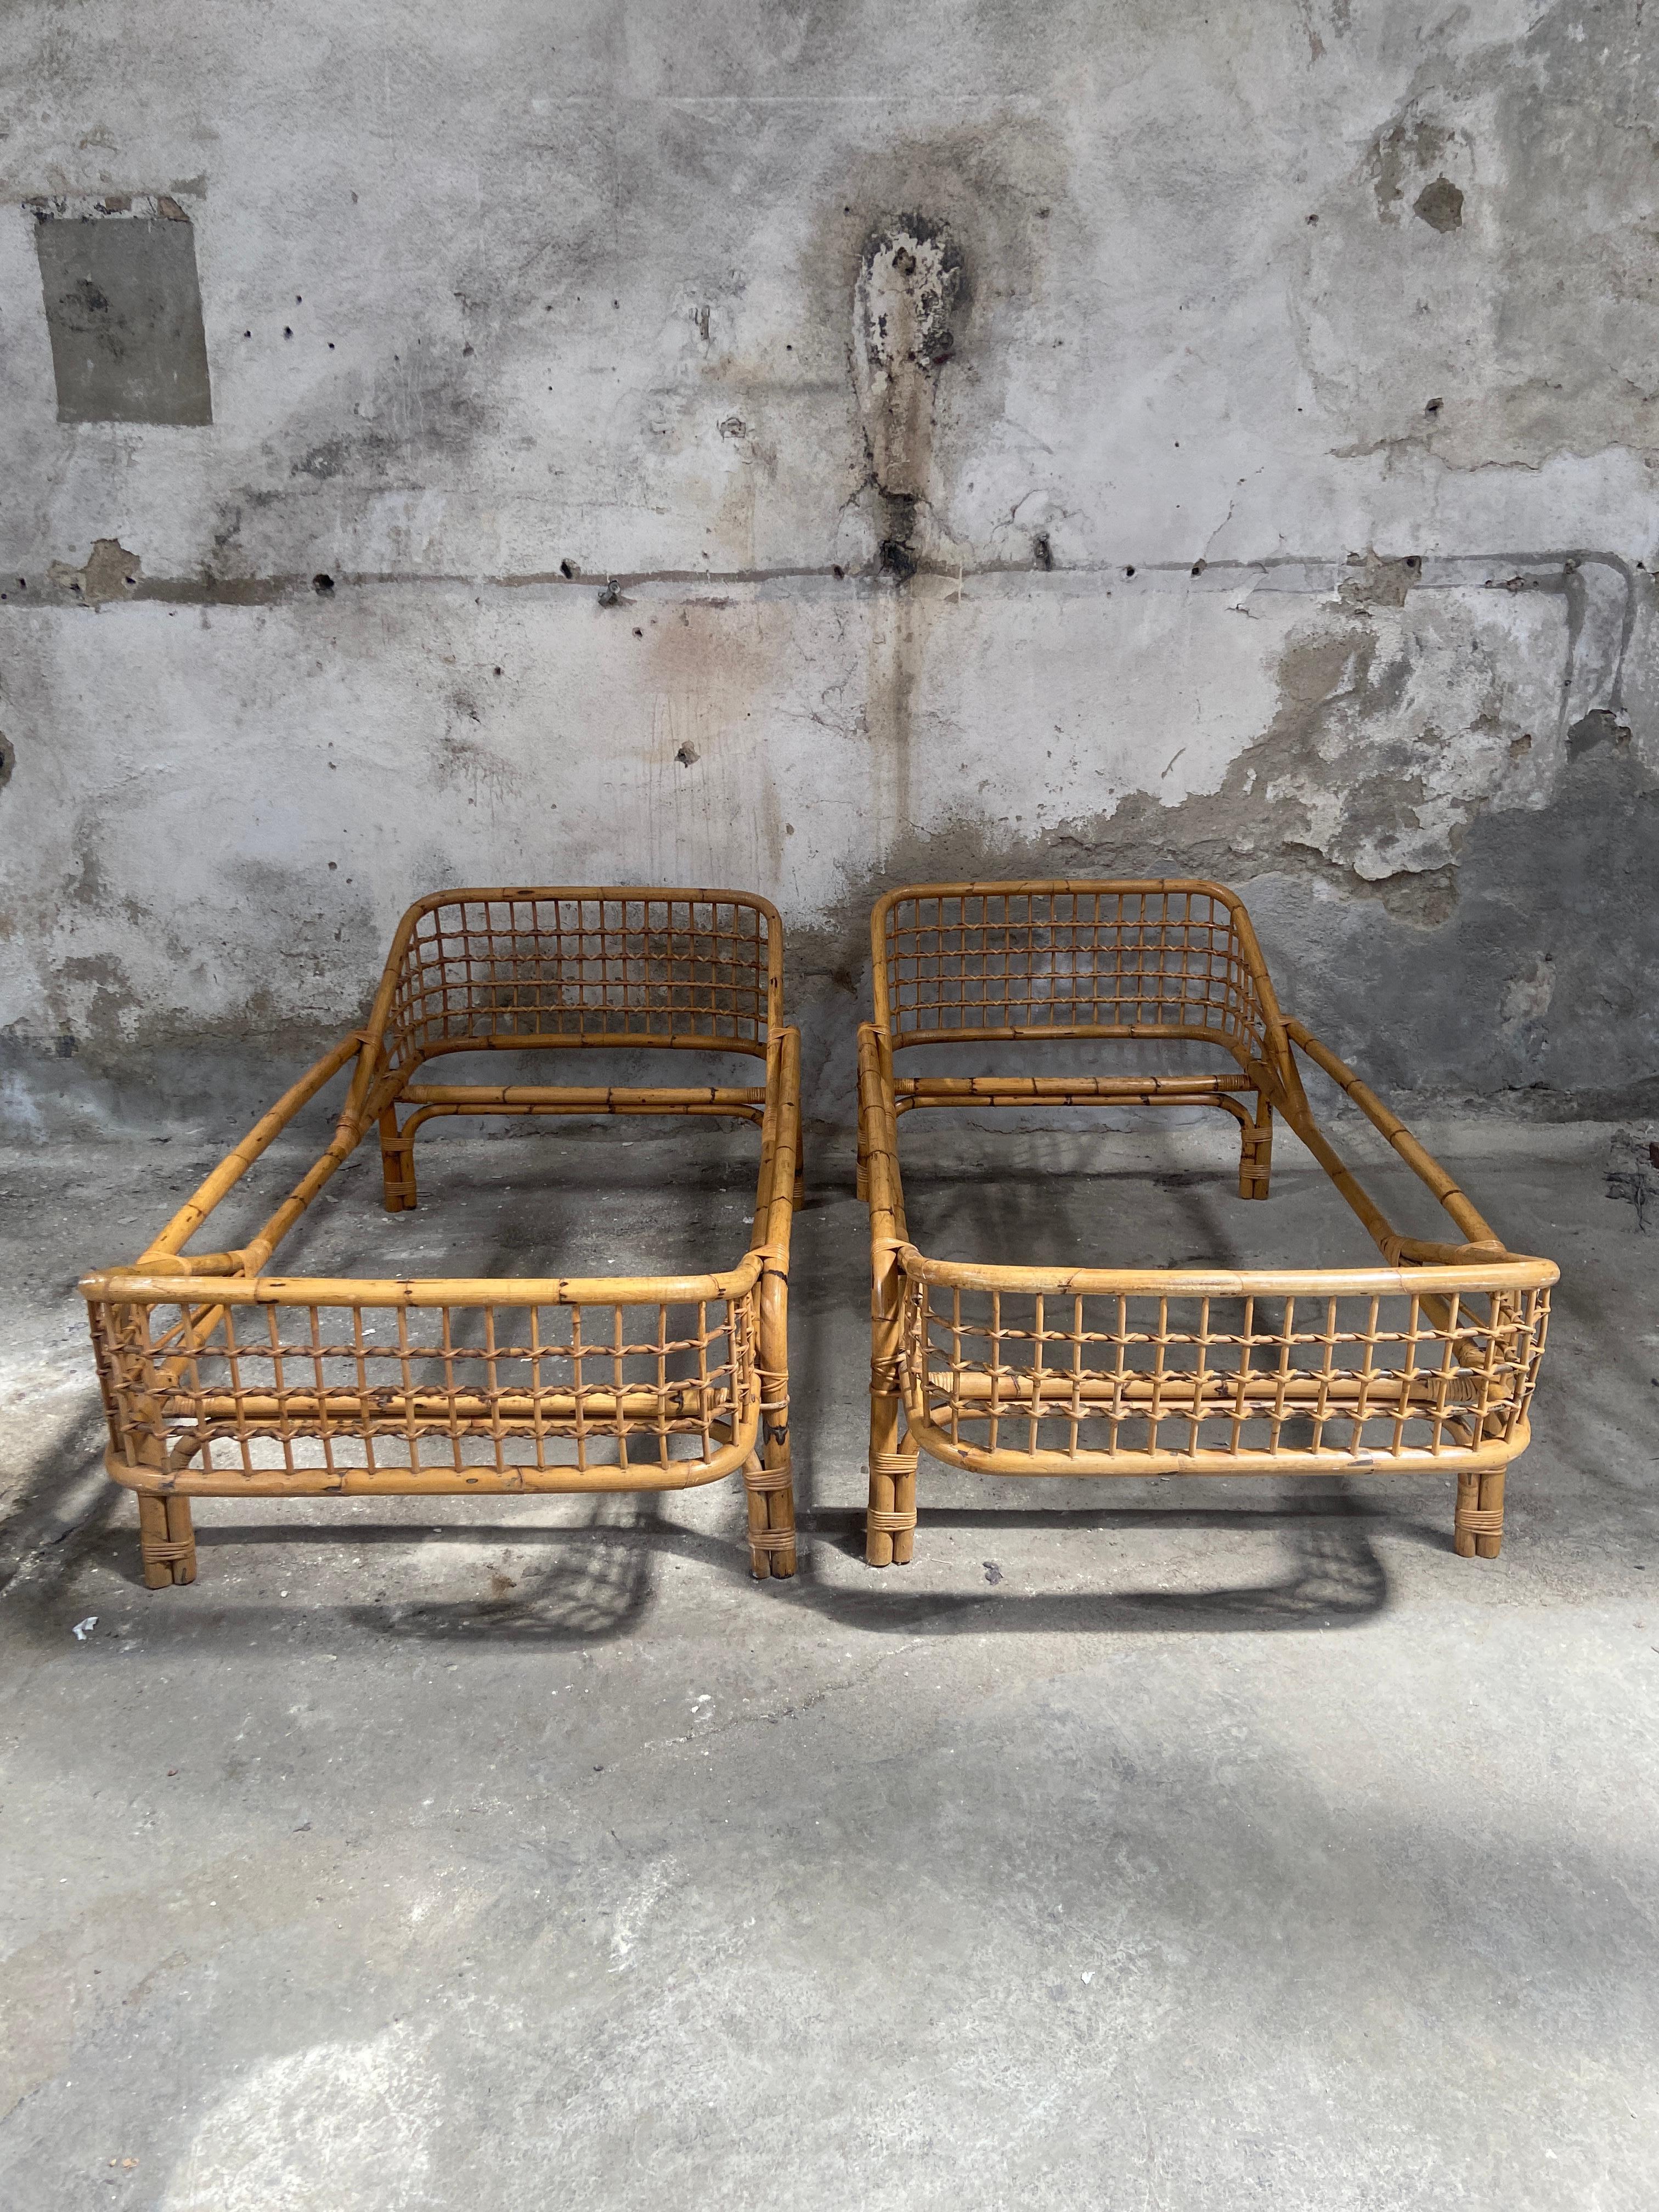 Mid-Century Modern Italian Pair of Bamboo and Rattan Single Beds with their original bed nets from 1970s
The beds need a mattress cm.190x80
The beds have a wonderful patina due to age and use
